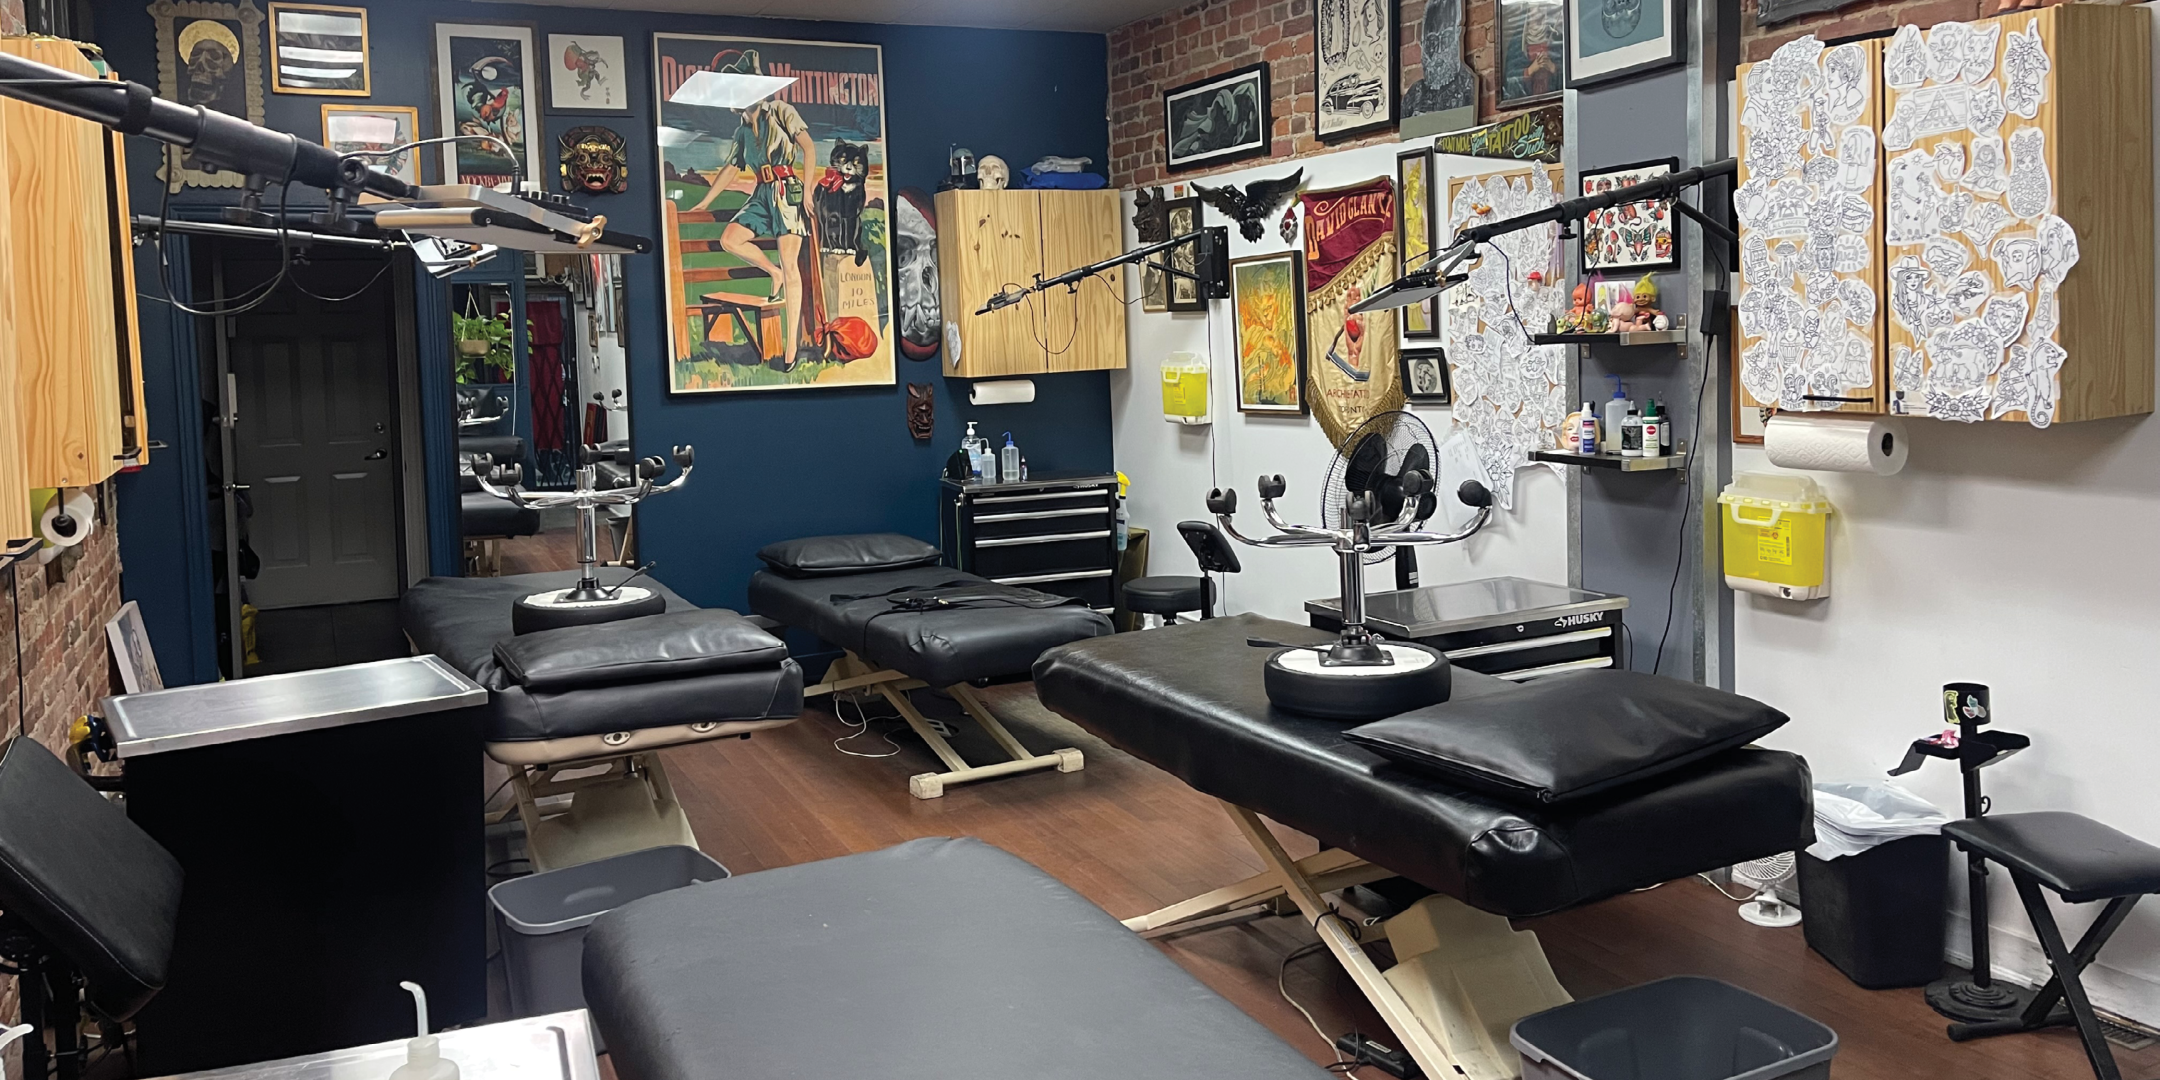 Inside of Tattoo Parlor